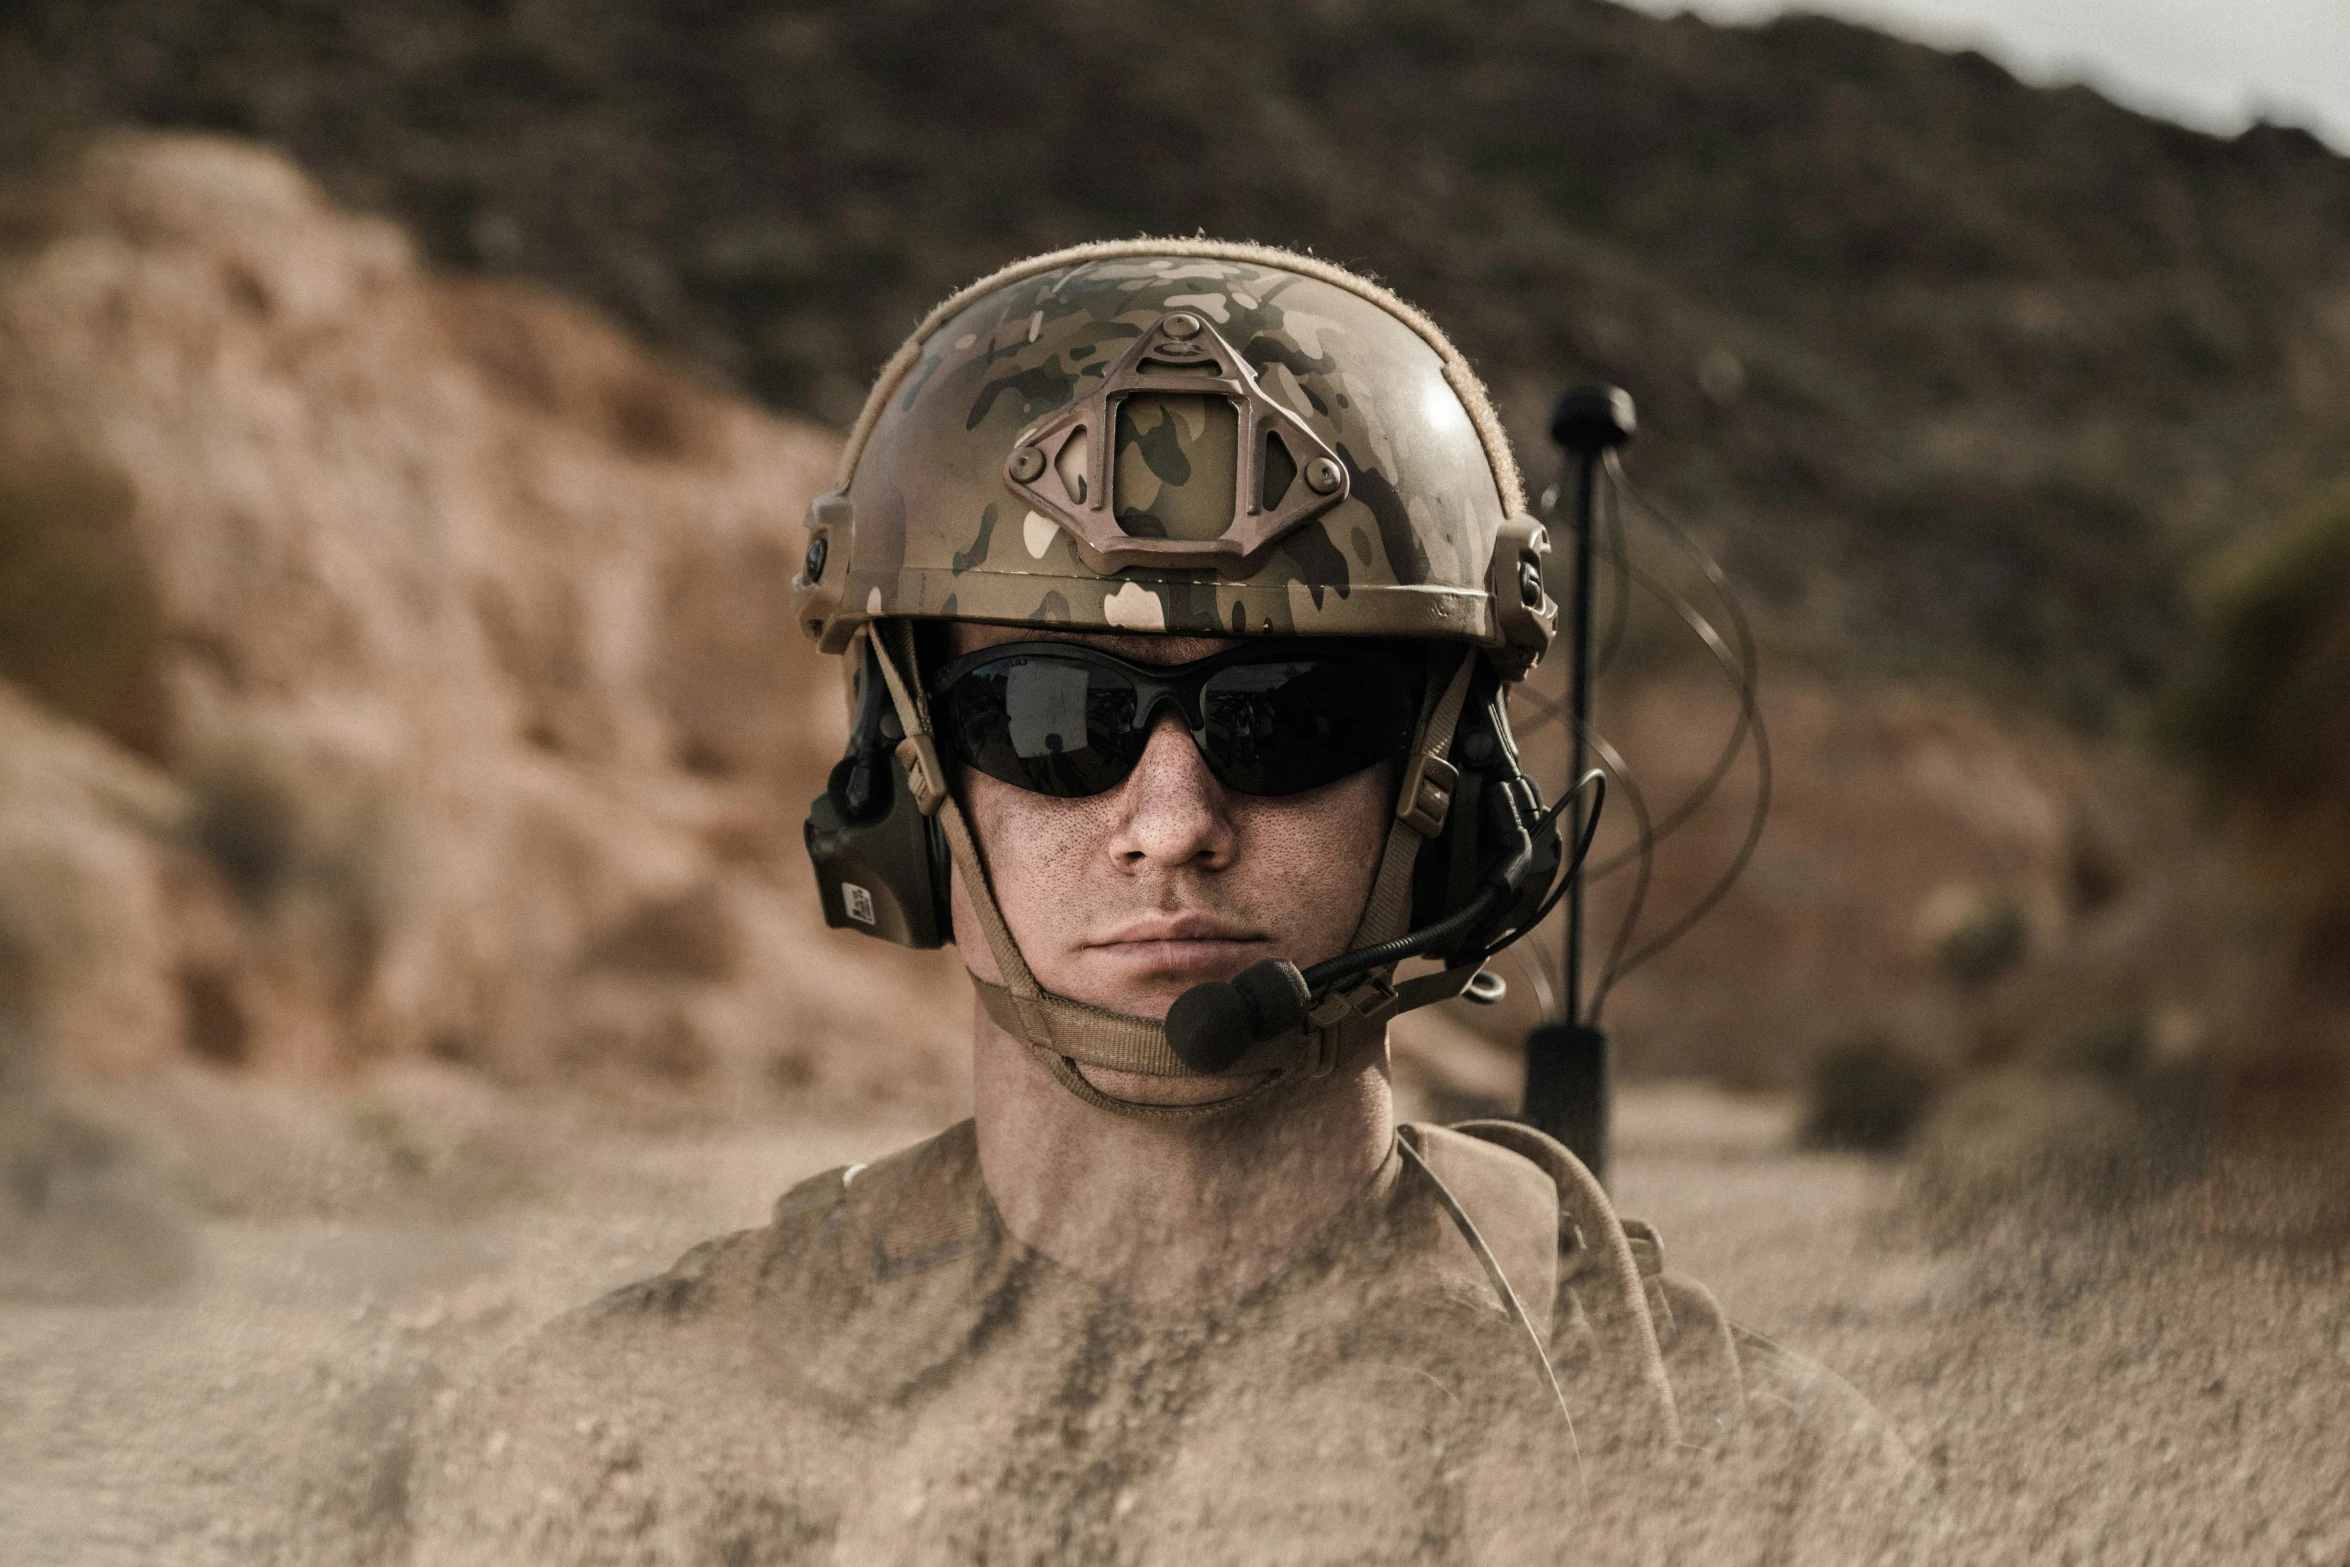 a man with sunglasses and a uniform stands in the middle of a dirt field